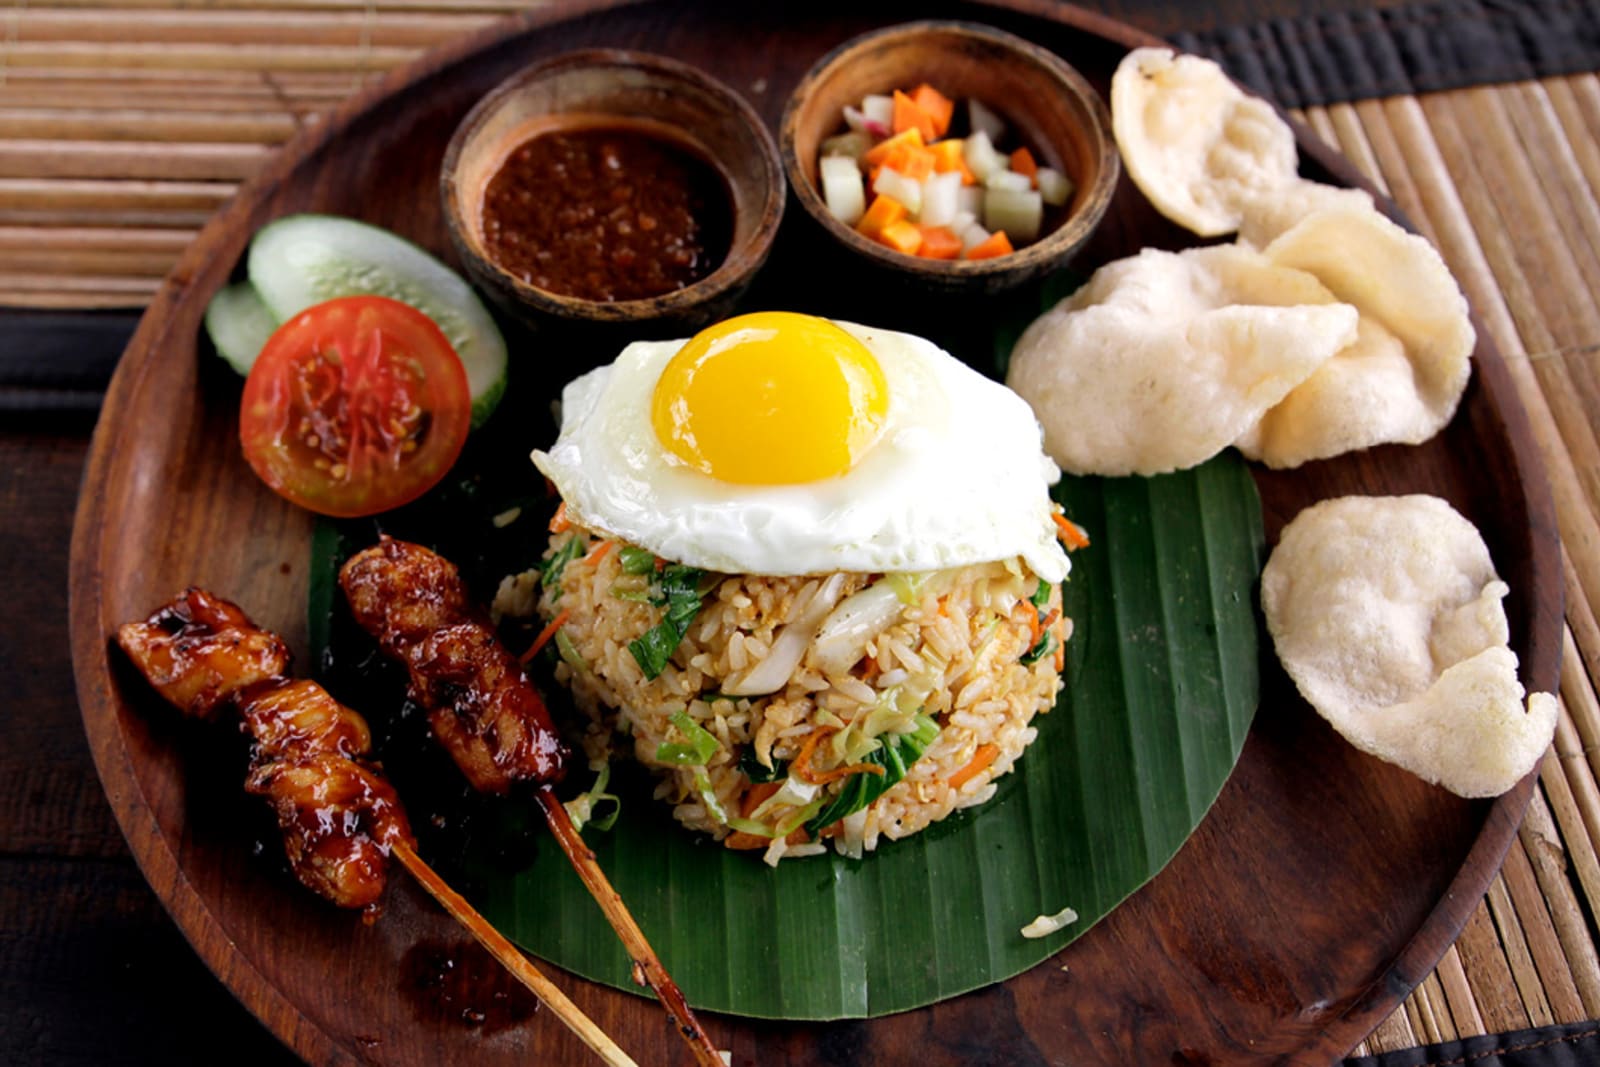 Fried rice and chicken satay are some of the best things you can eat in Indonesia